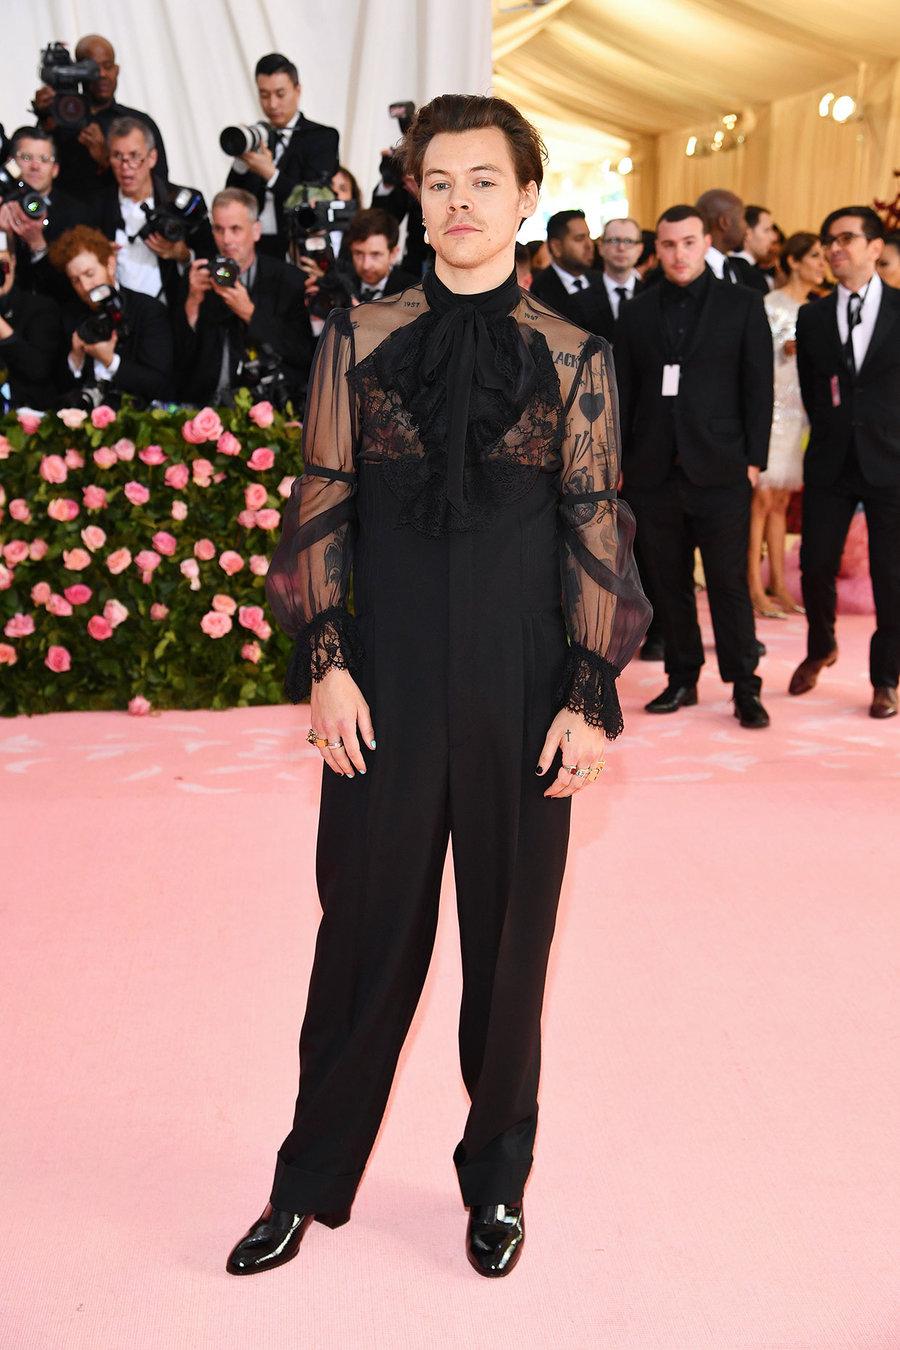 Met Gala 2019 Red Carpet Photo: See the Pics